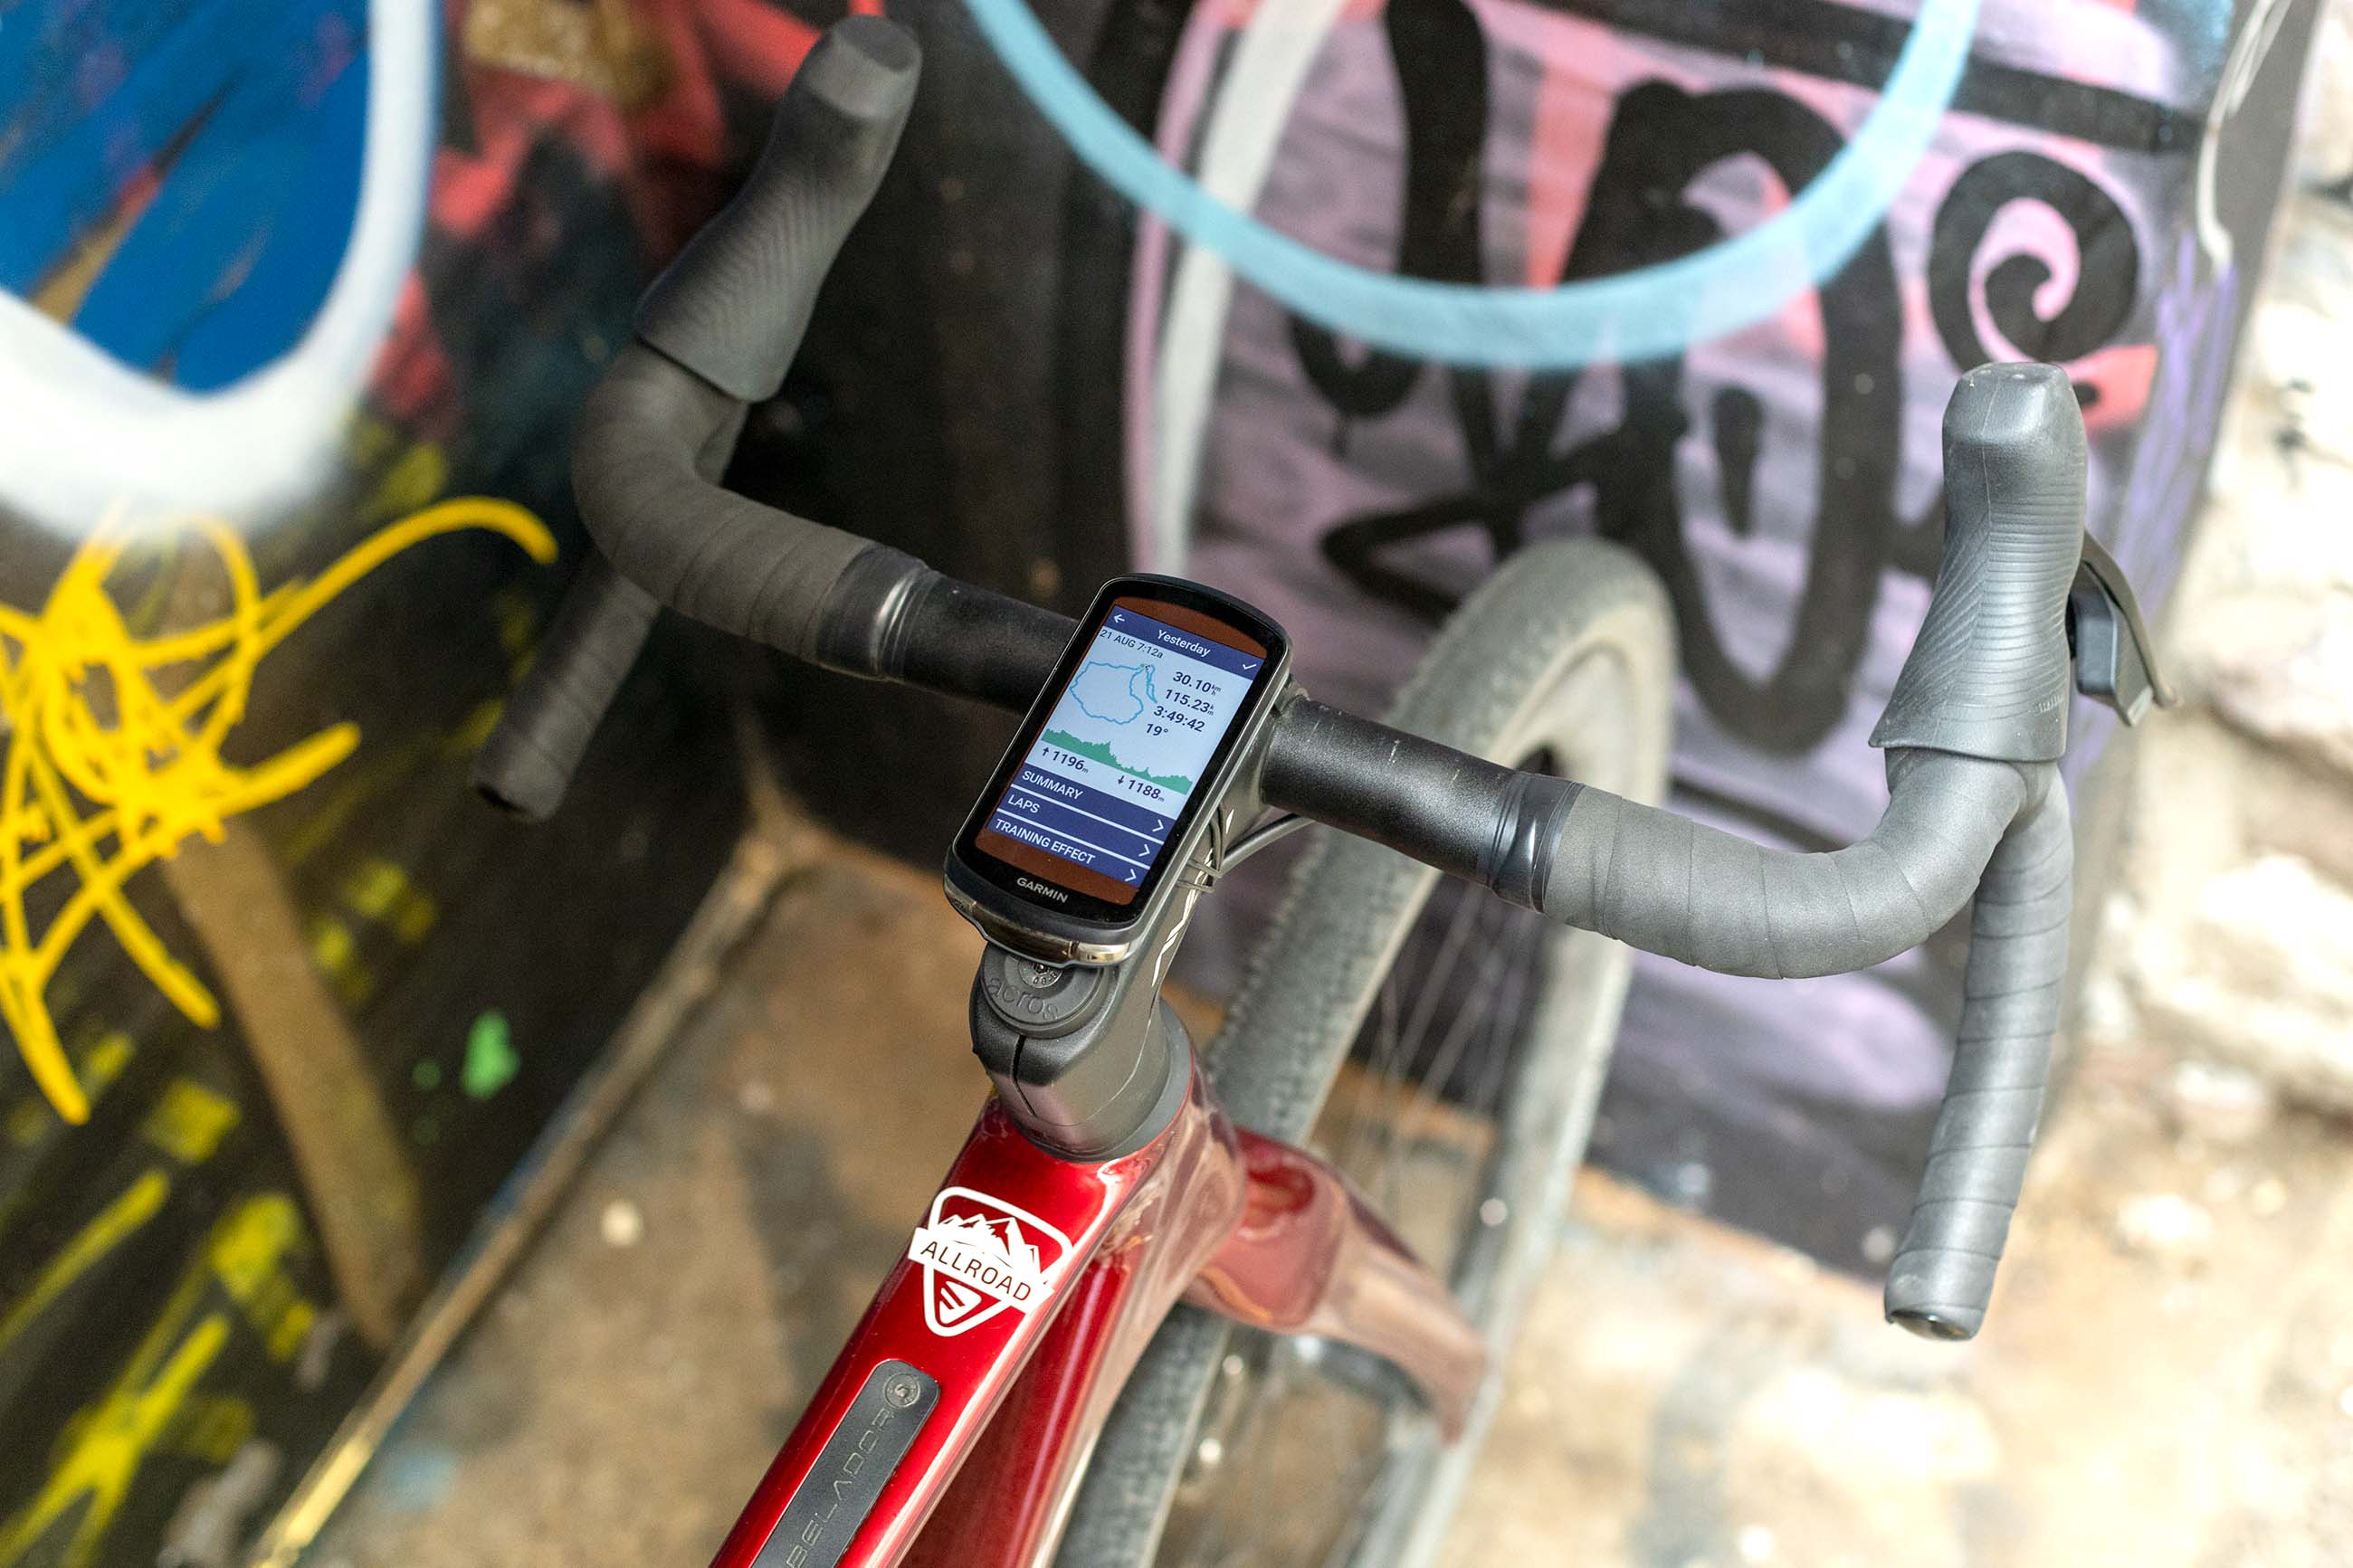 Garmin's Edge 1040 Solar Is the Last GPS Unit You'll Ever Buy for Cycling